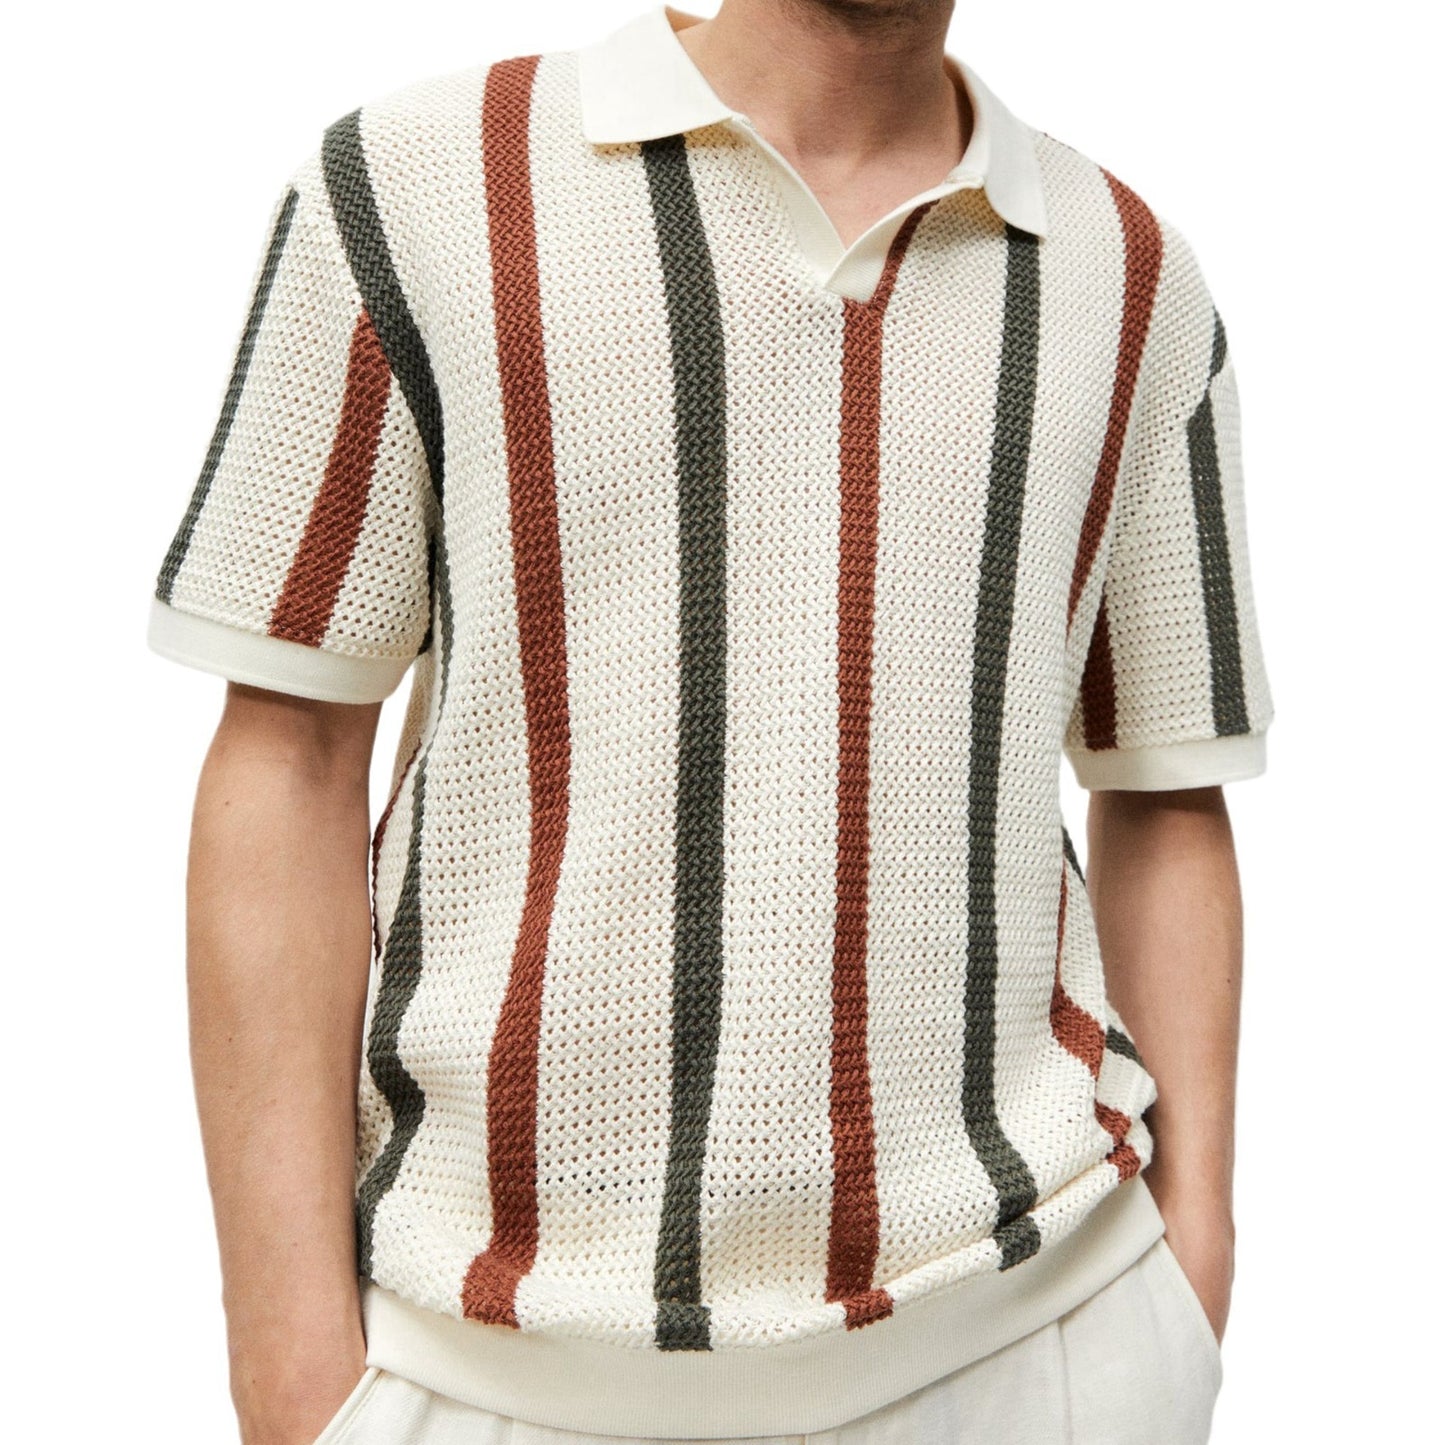 Thick needle hollowed out knit shirt with striped contrasting color woolen casual polo shirt as a Father's Day gift